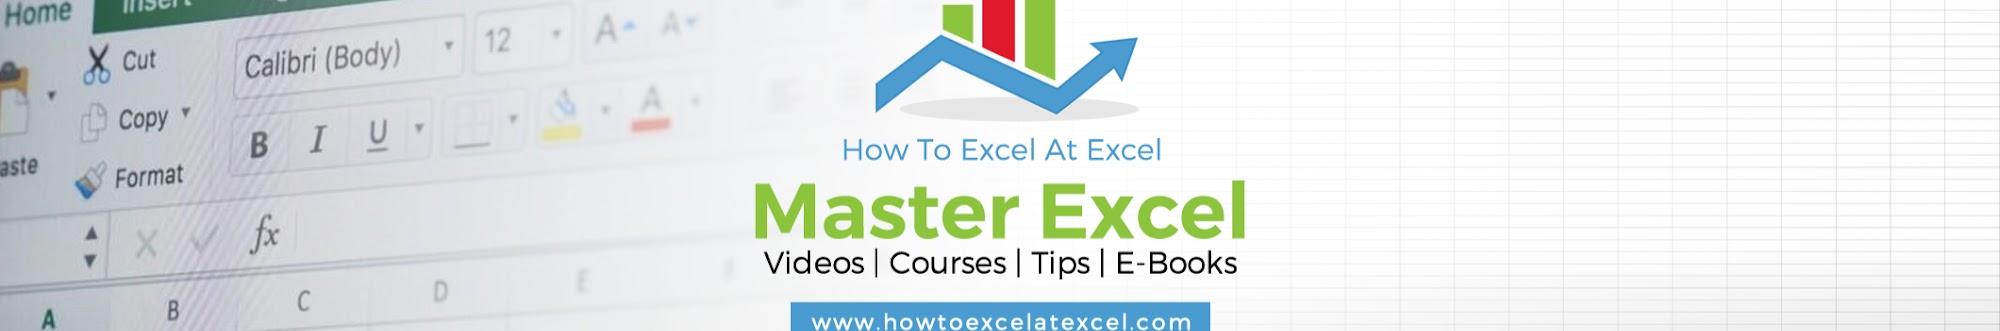 How To Excel At Excel.Com